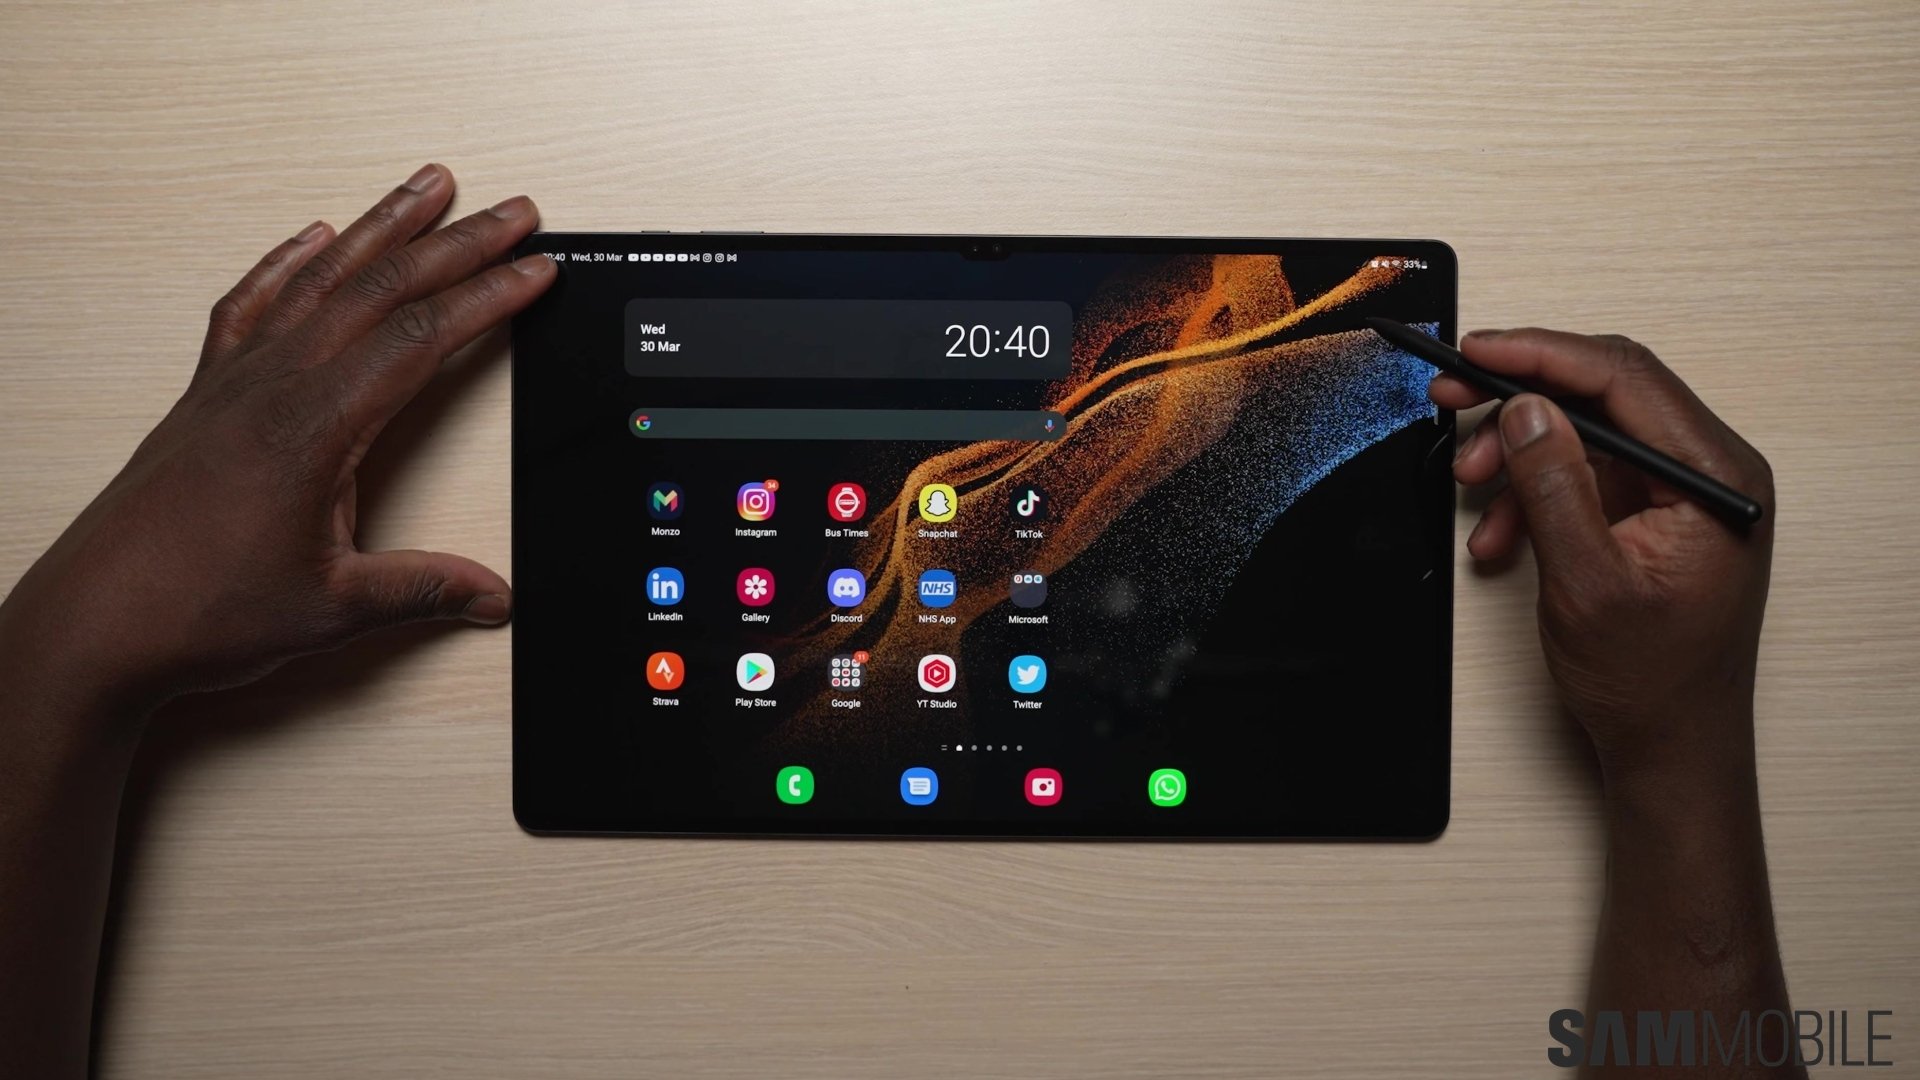 Samsung Galaxy Tab S6 review: The top Android tablet of 2019 - SamMobile